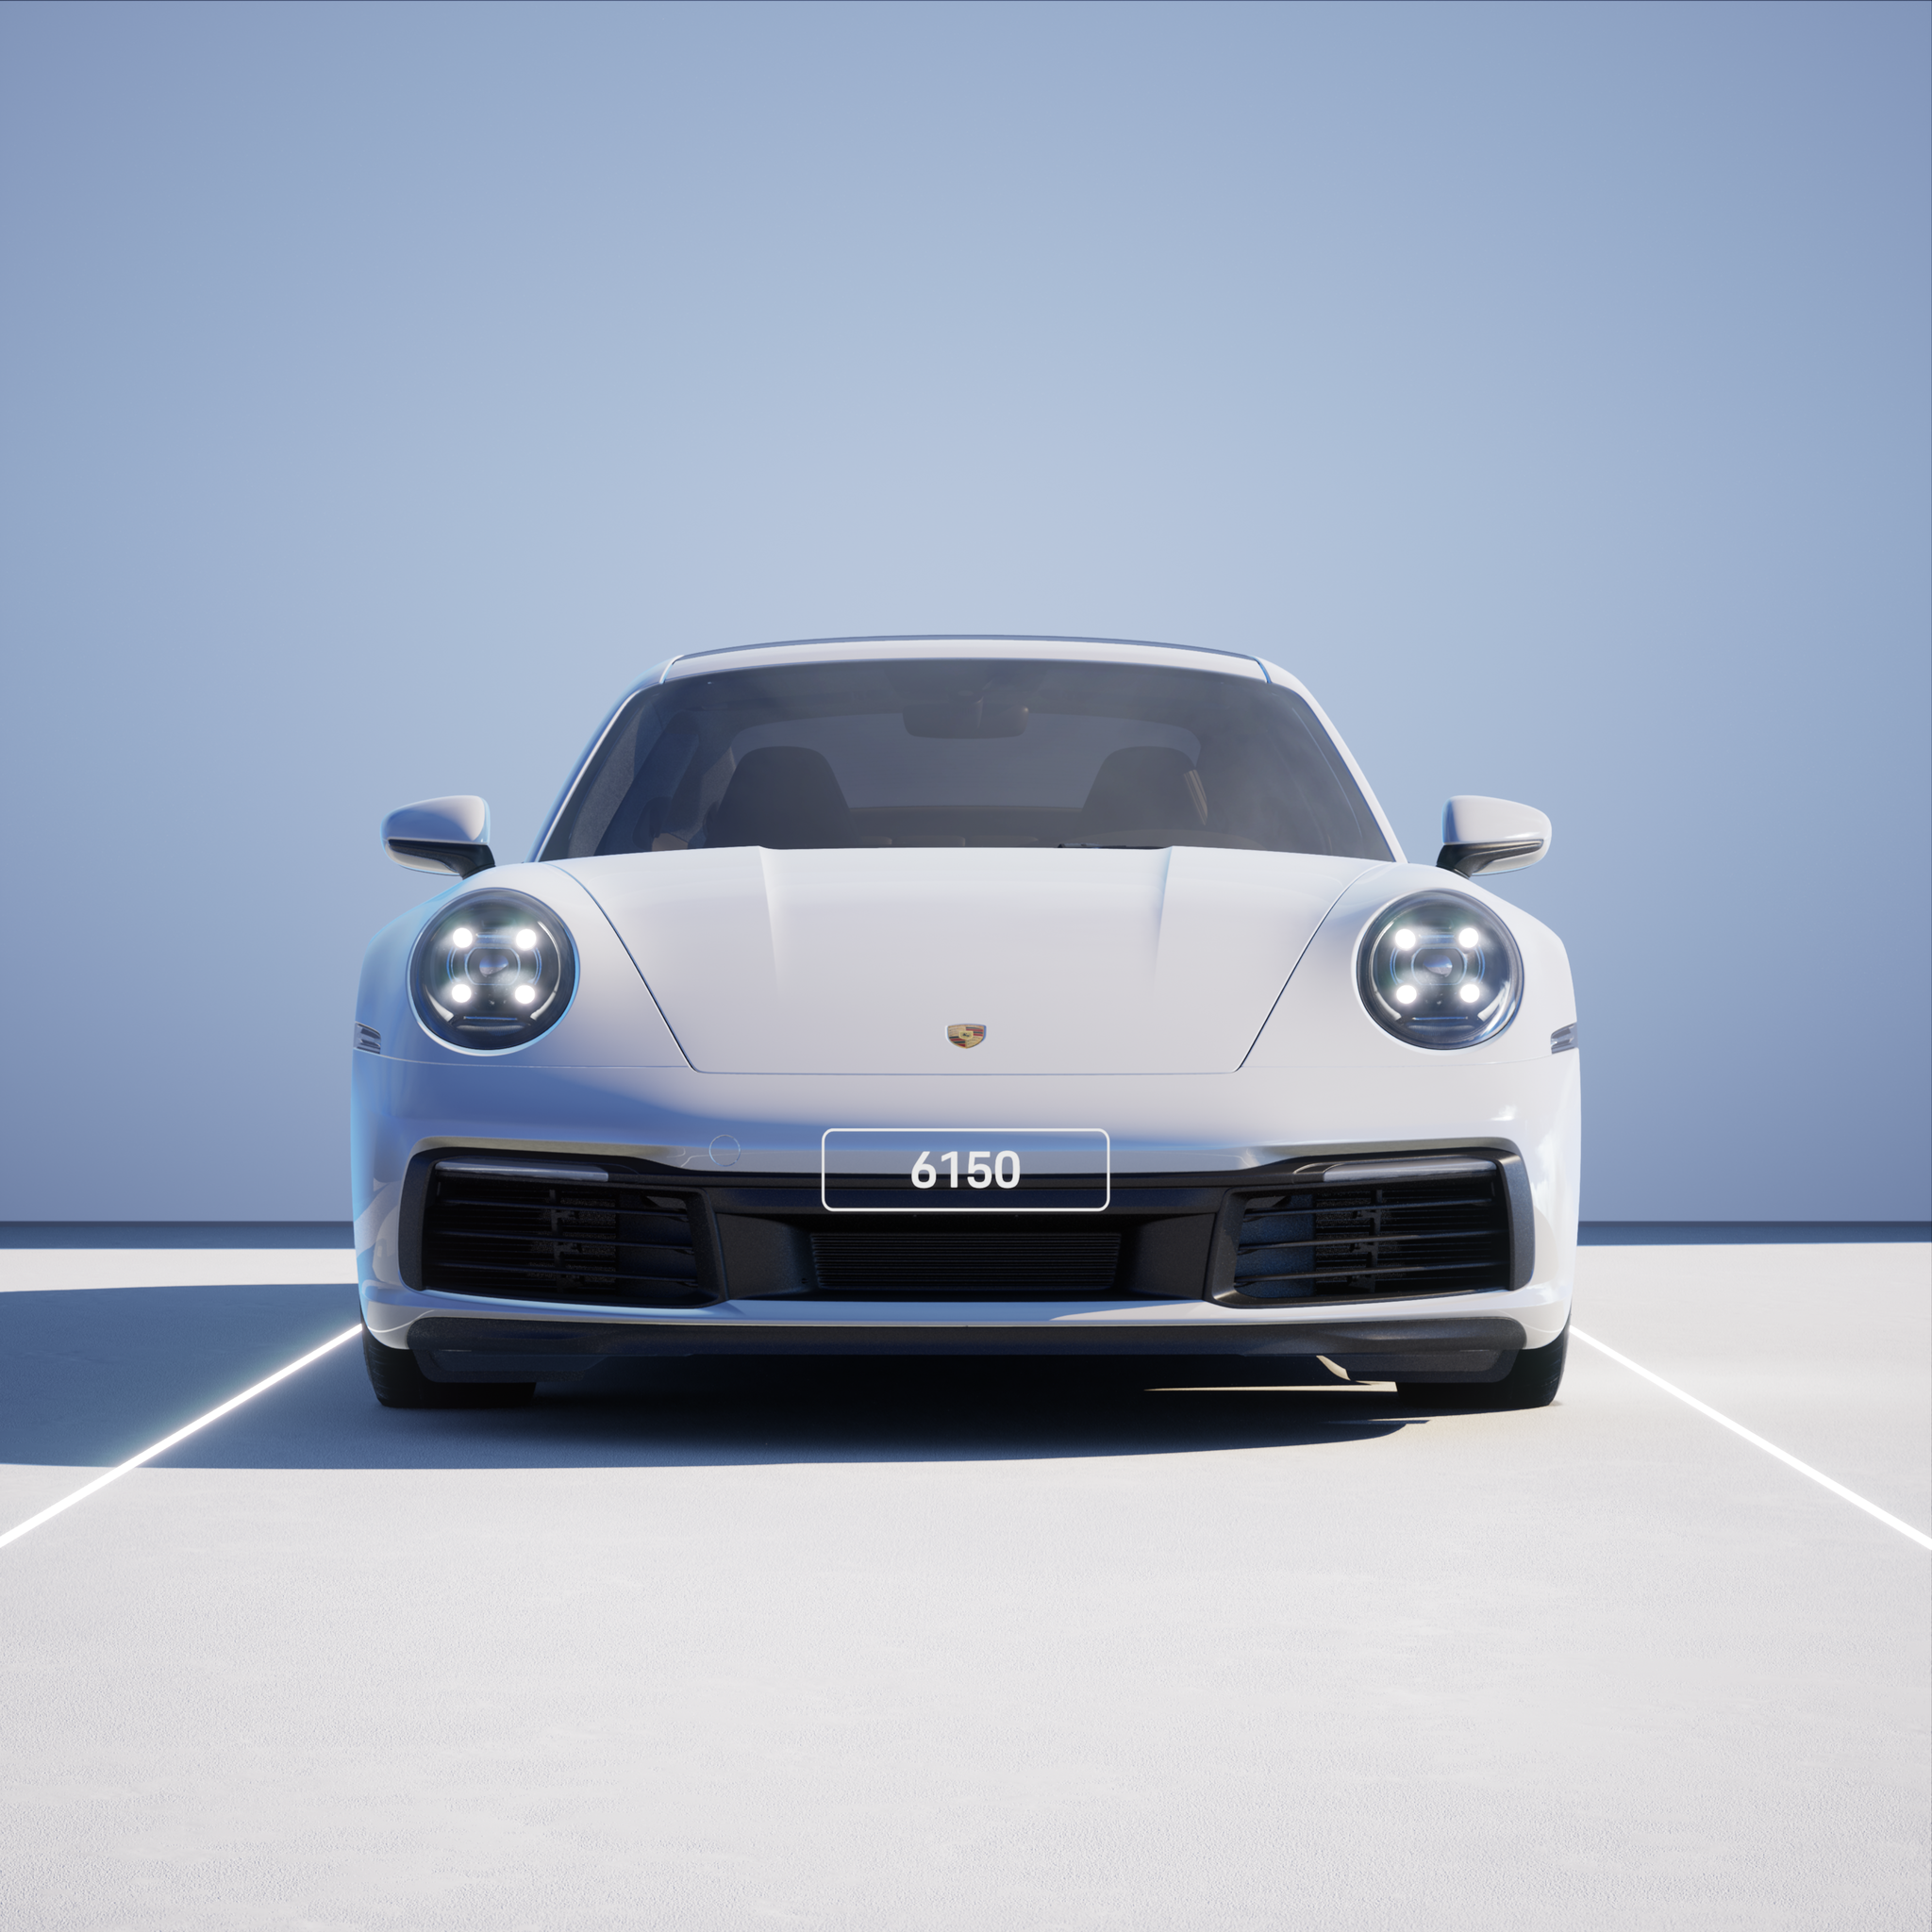 The PORSCHΞ 911 6150 image in phase